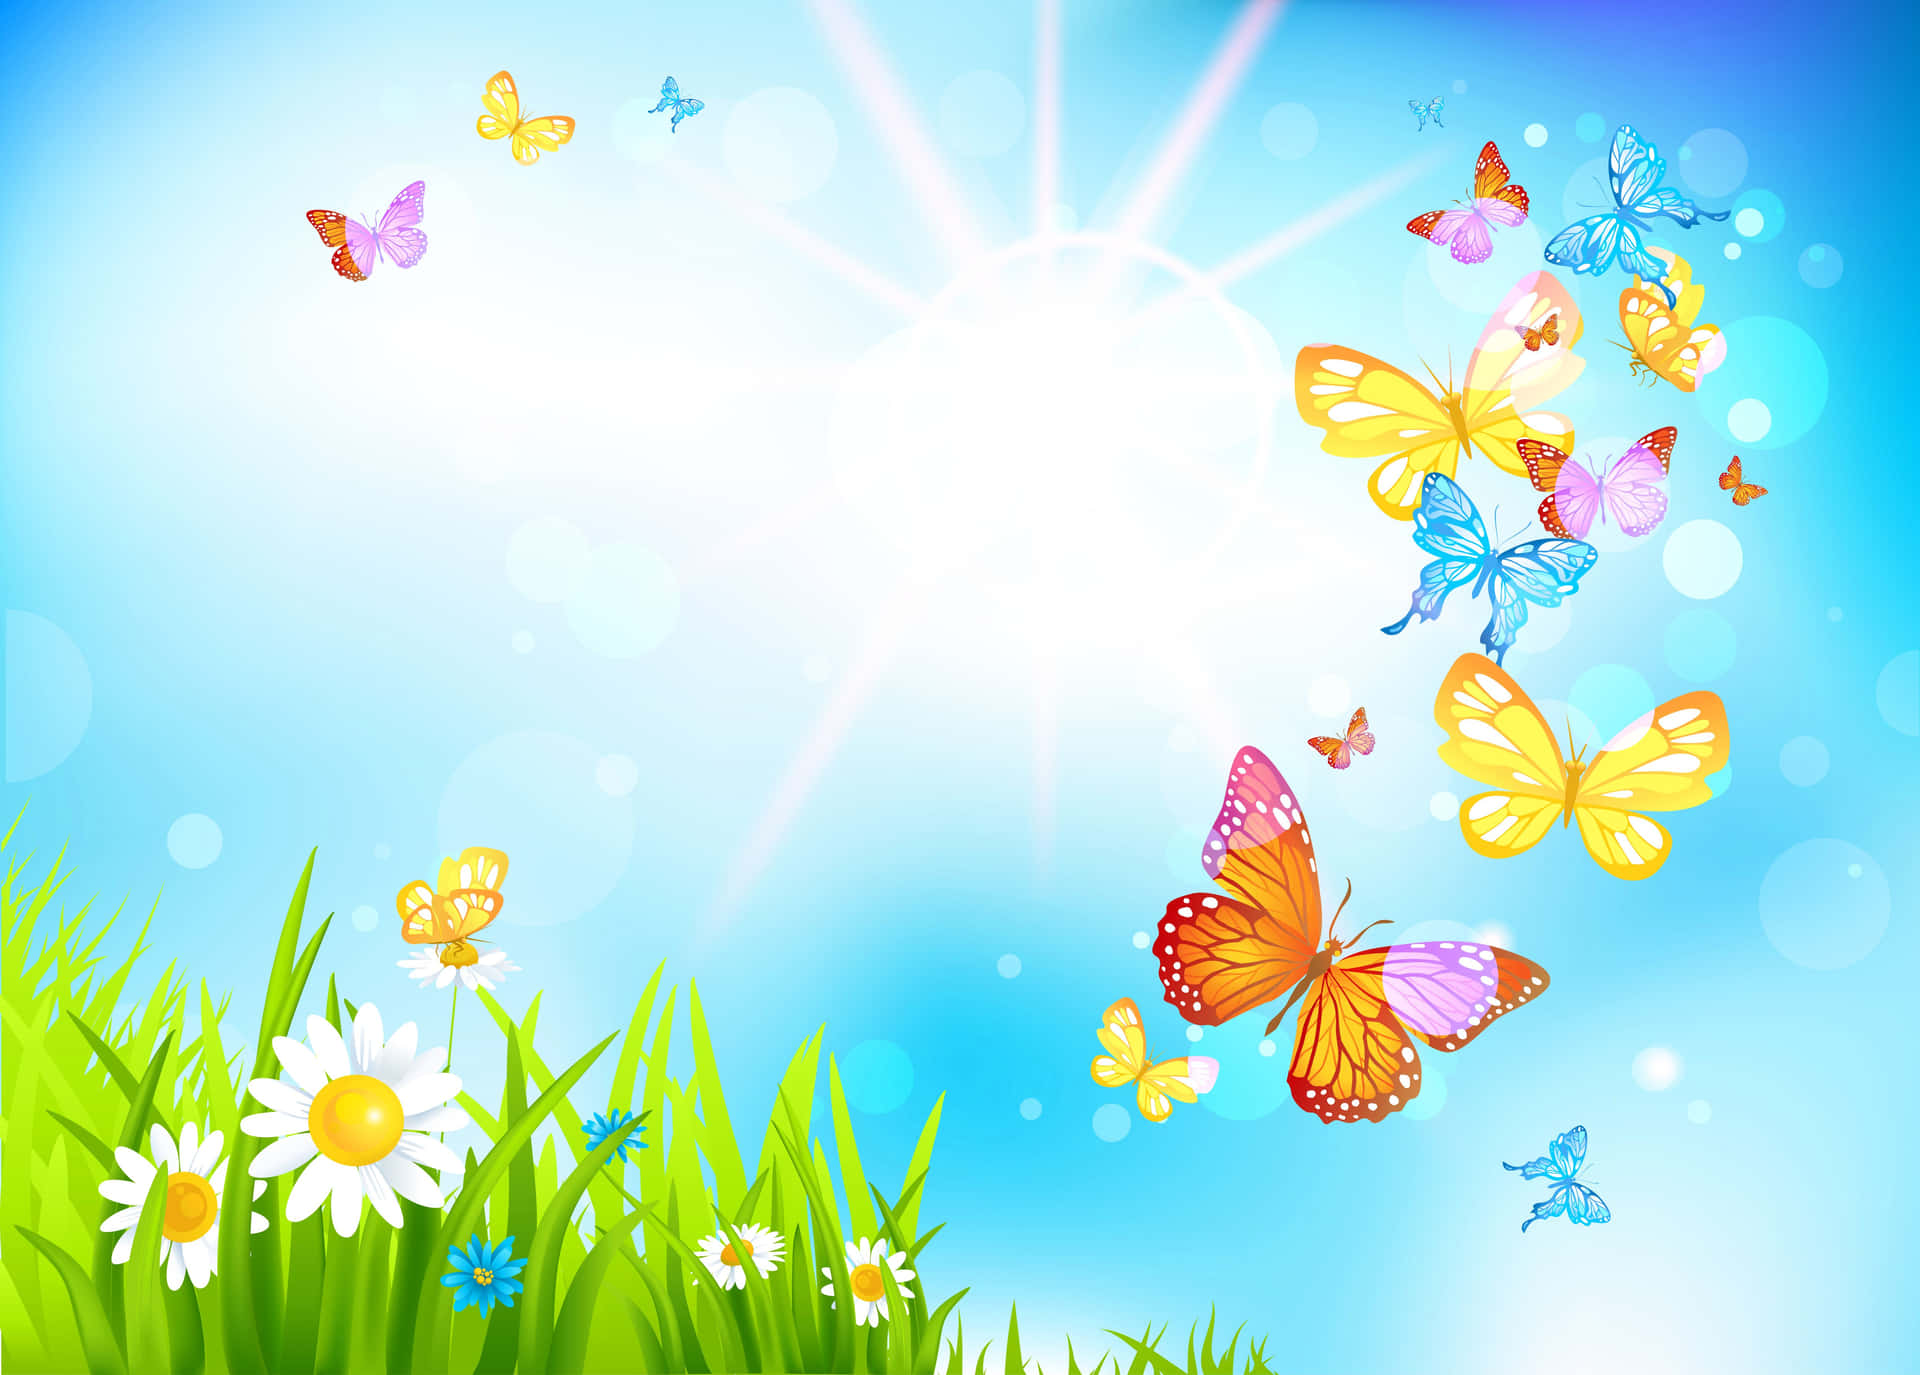 “Beautiful butterfly in a vibrant and colorful atmosphere”